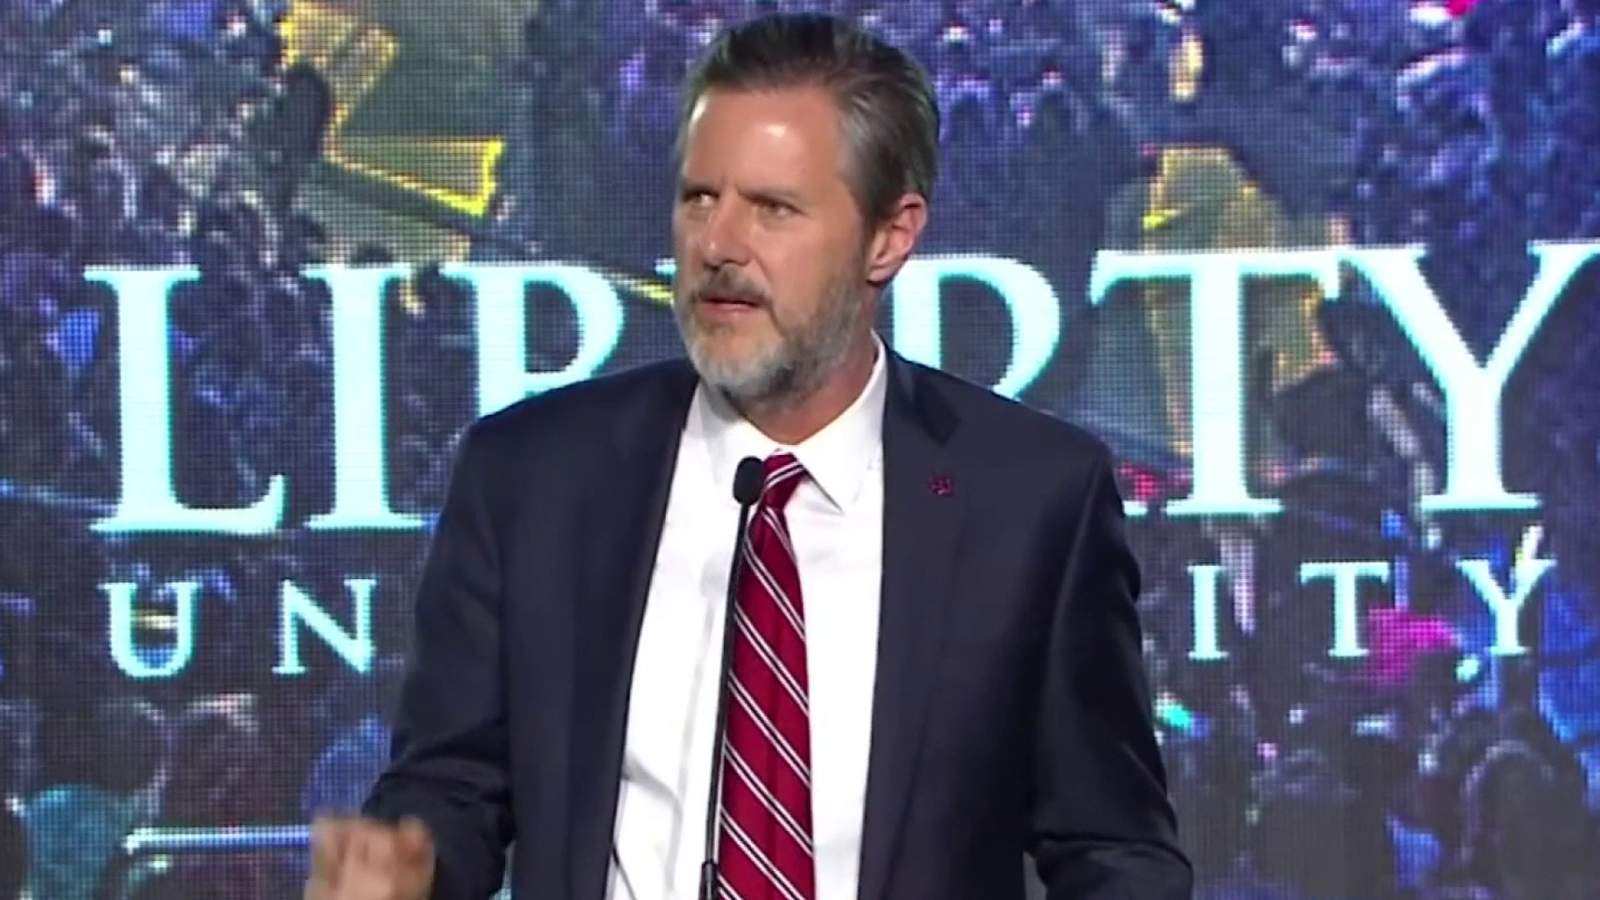 ‘I’m very relieved’: Liberty University students, alums react to Jerry Falwell Jr.‘s official resignation